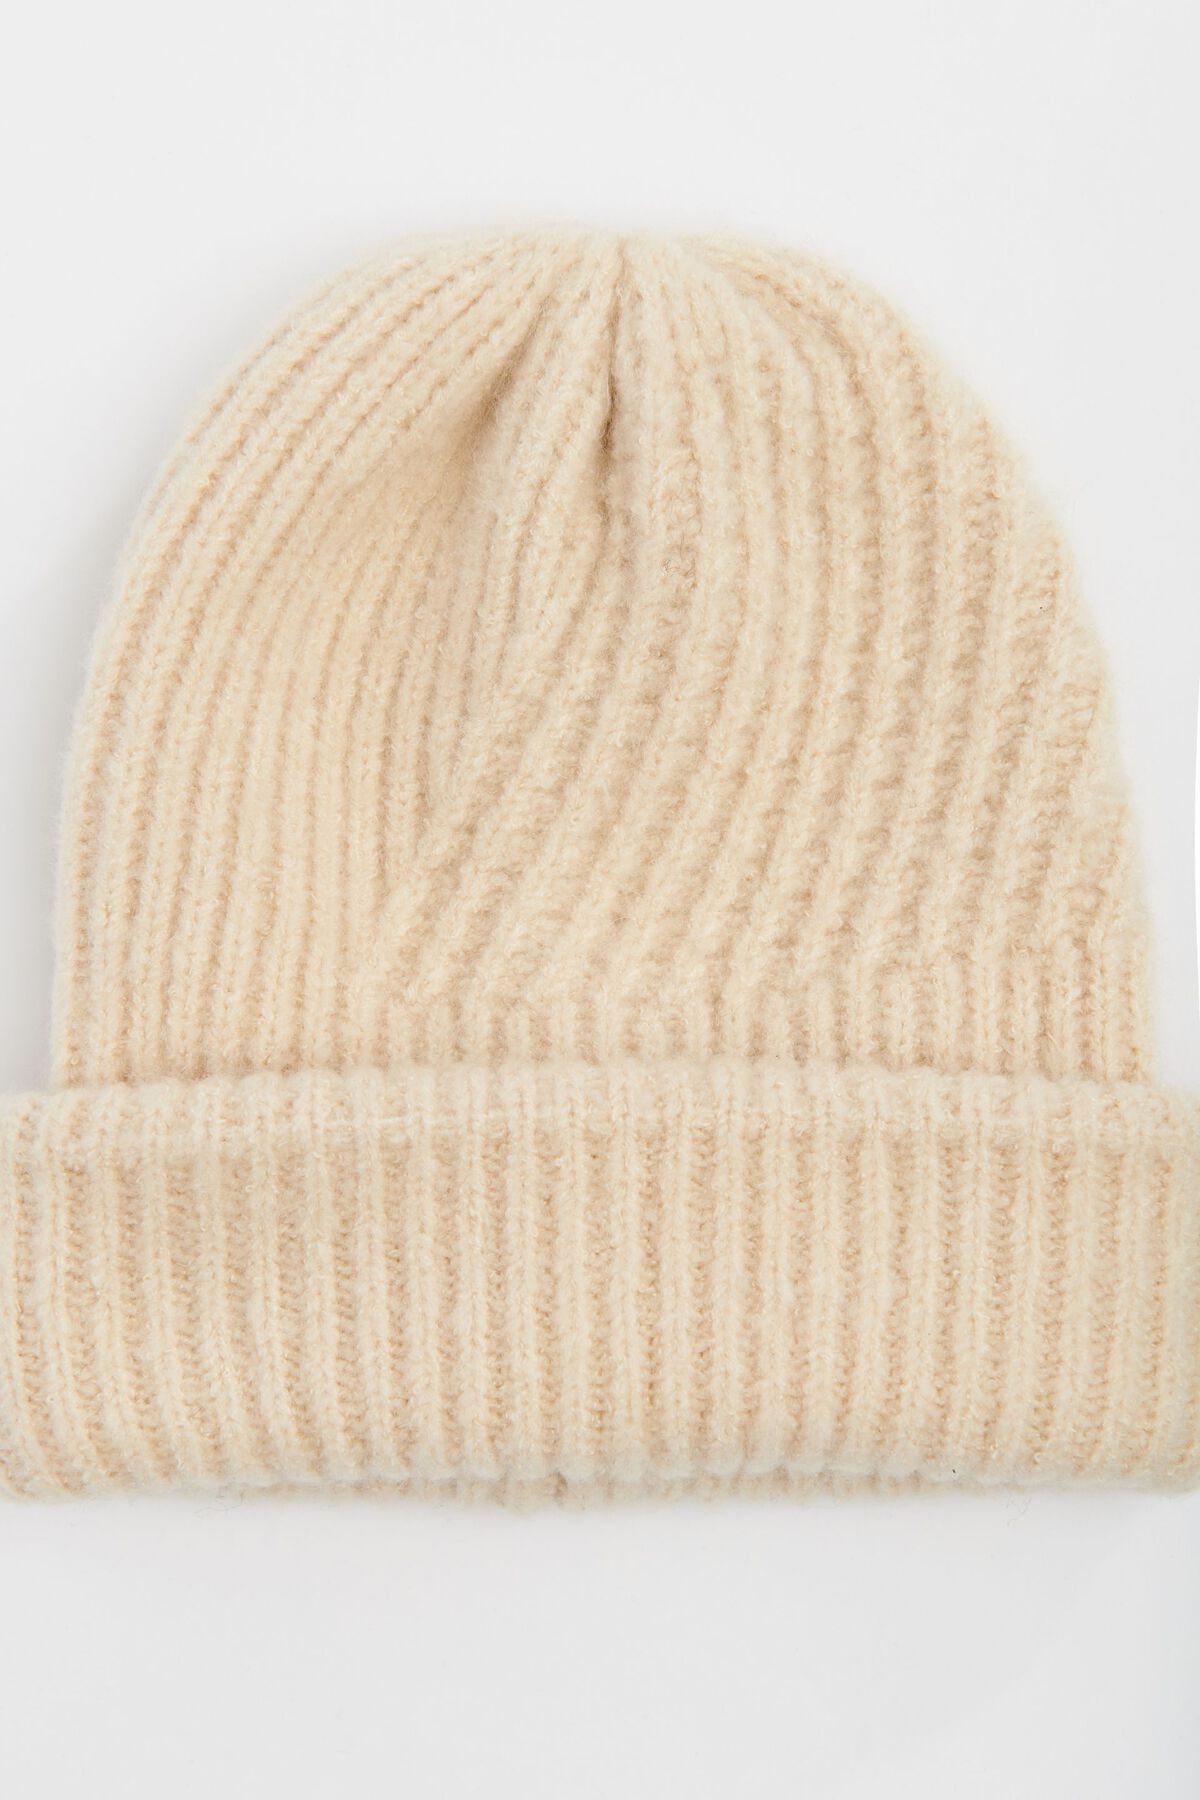 Dynamite Cable Knit Tuque. 4